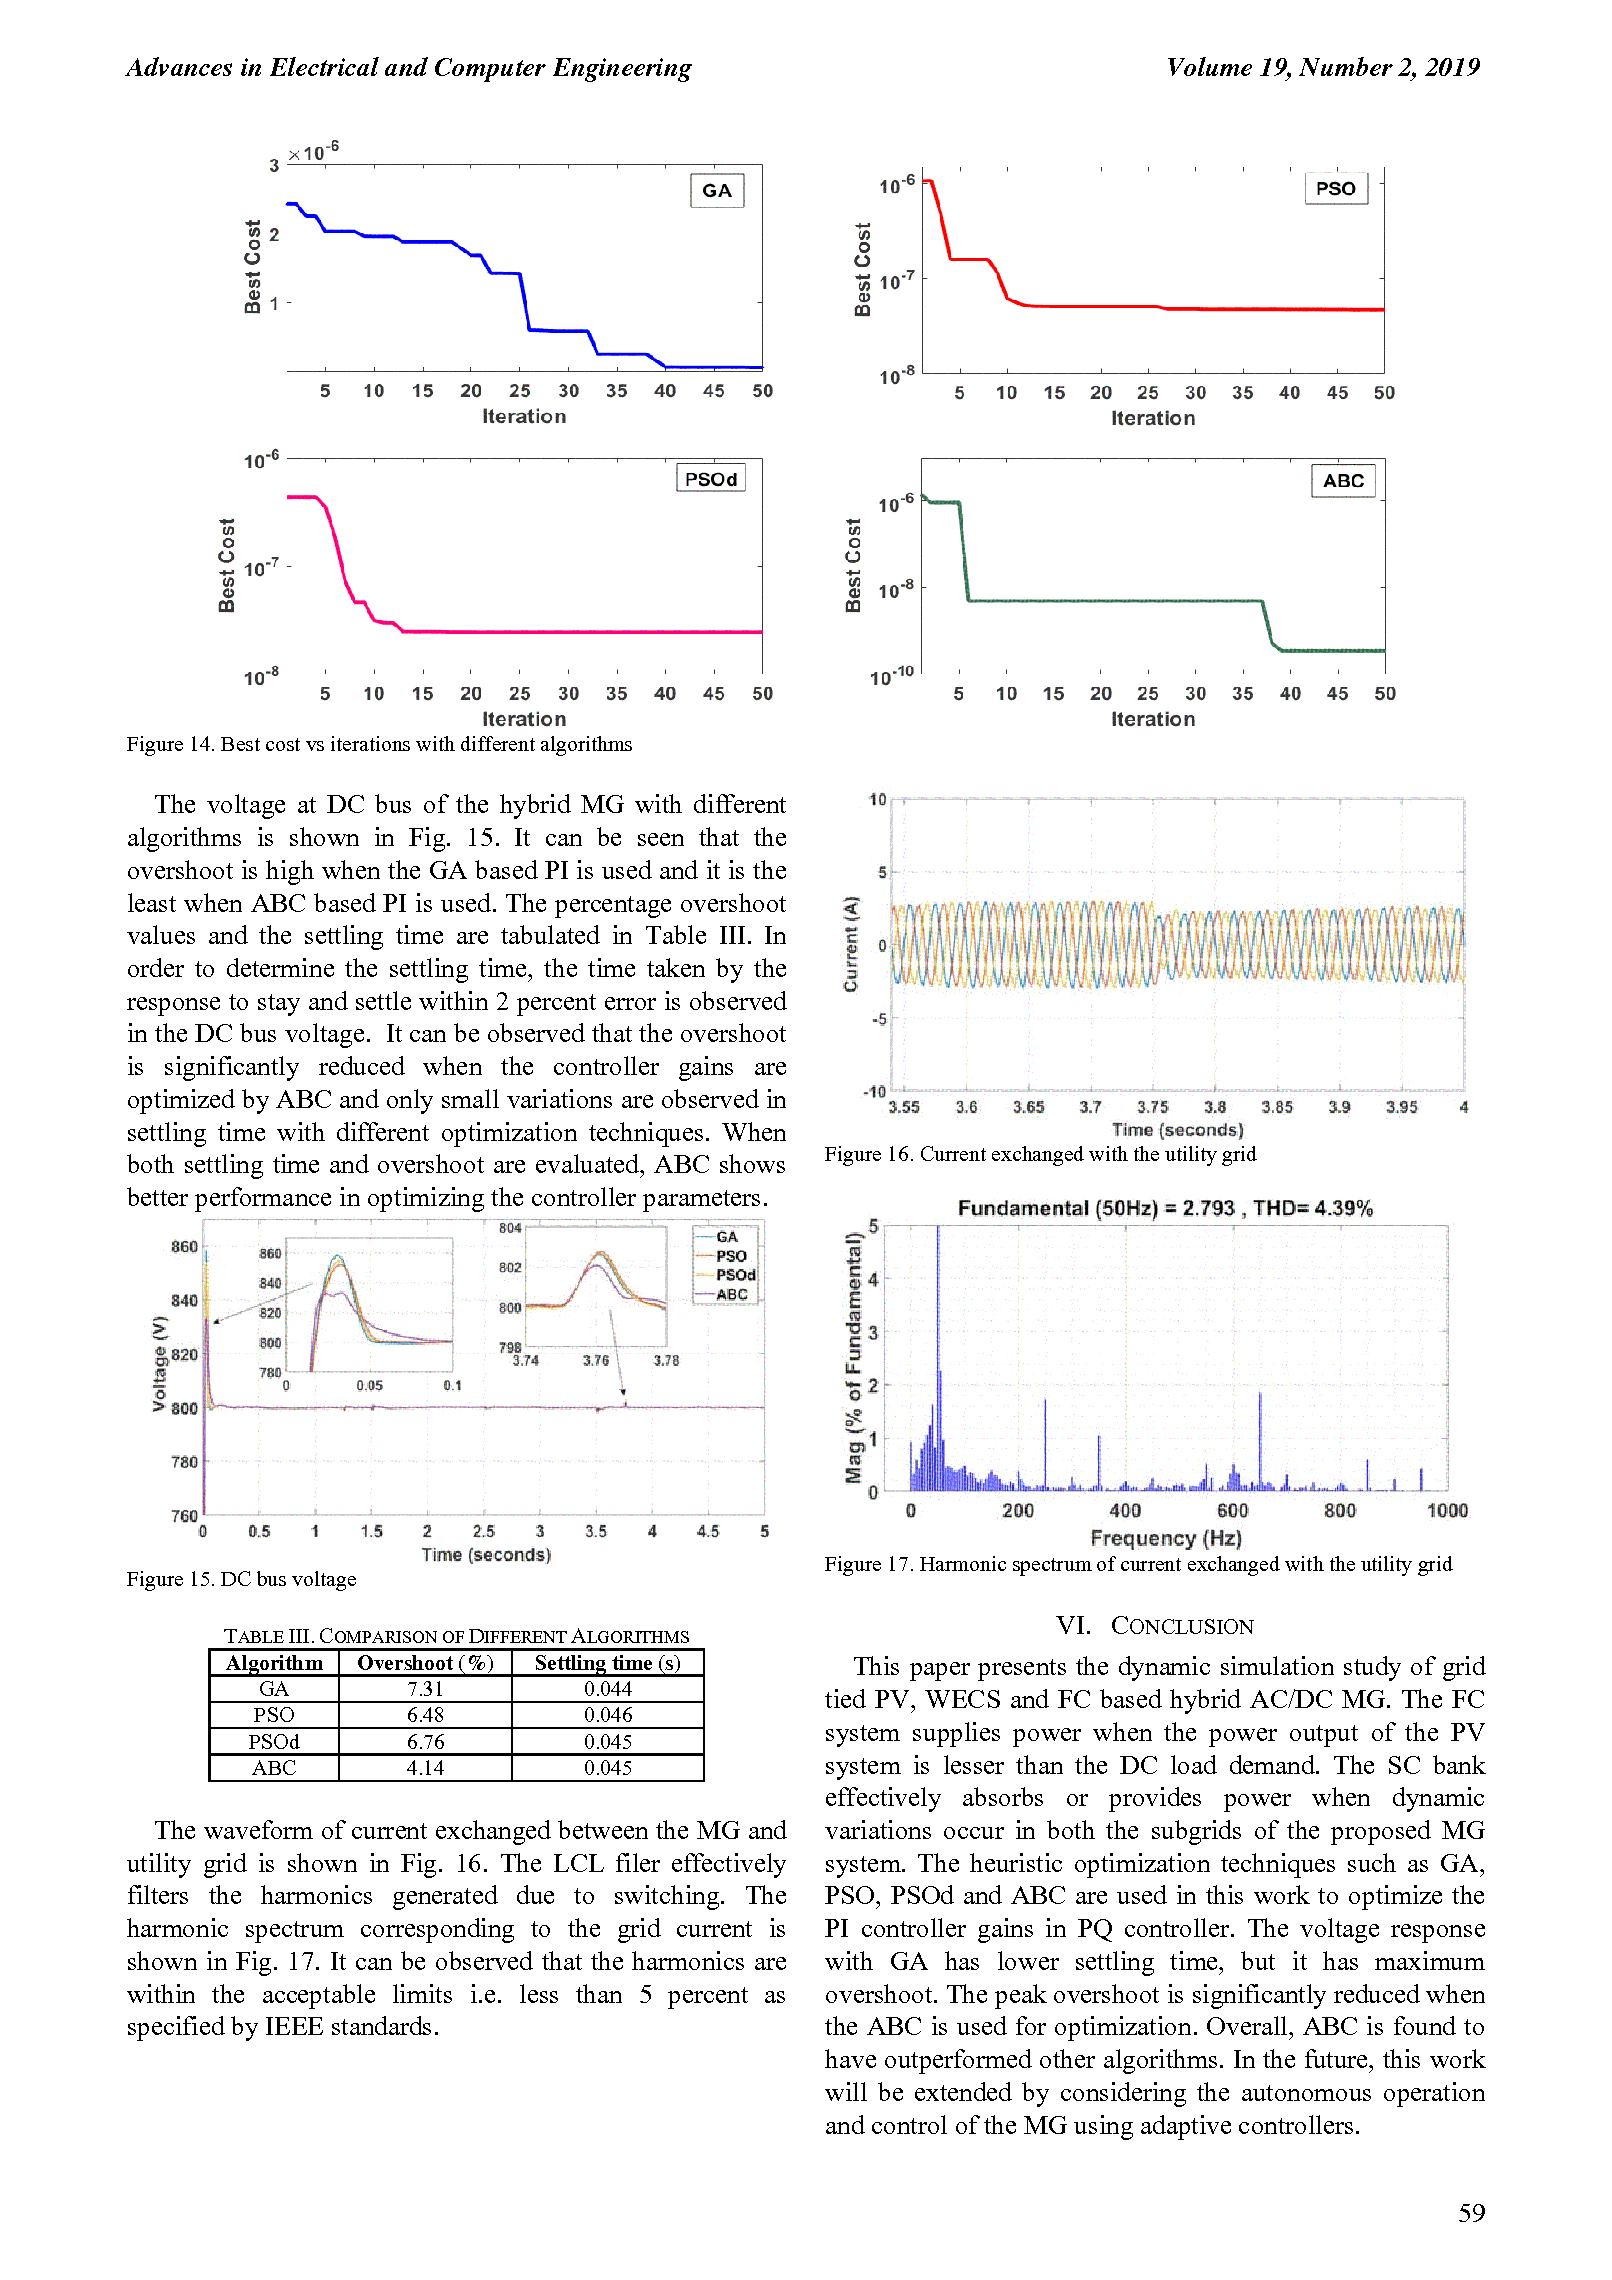 PDF Quickview for paper with DOI:10.4316/AECE.2019.02007